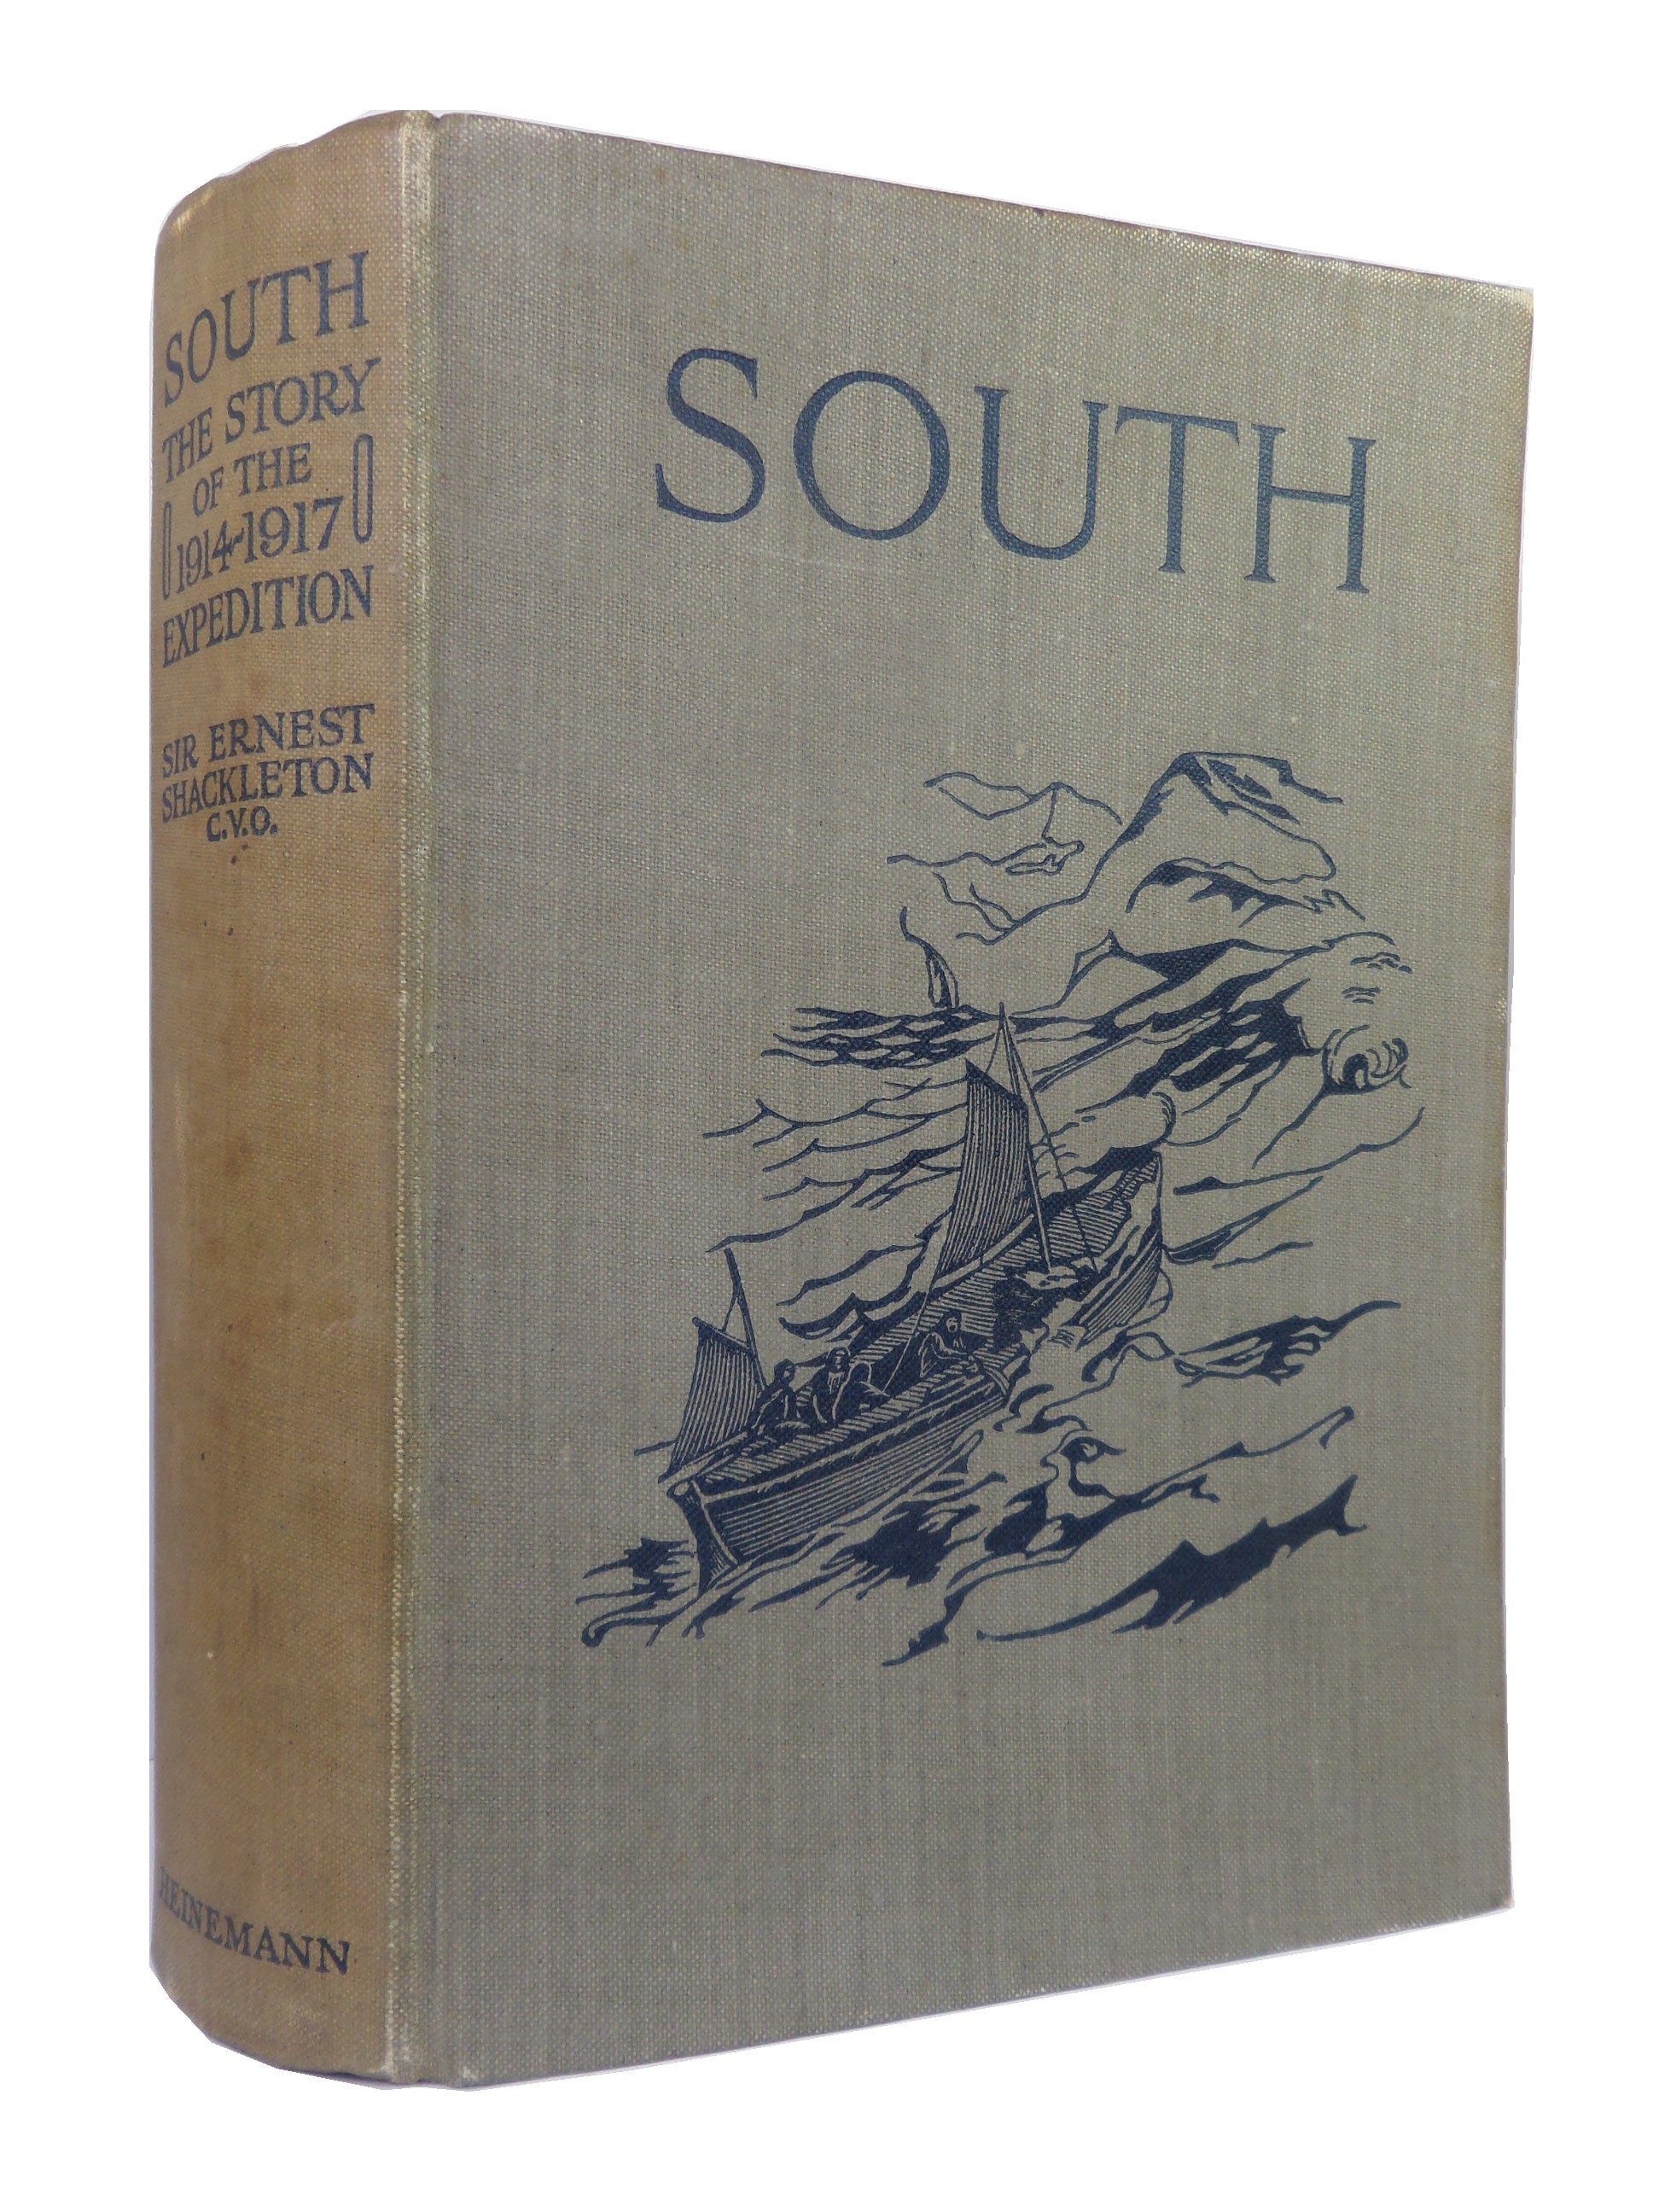 SOUTH: THE STORY OF ERNEST SHACKLETON'S 1914-1917 EXPEDITION